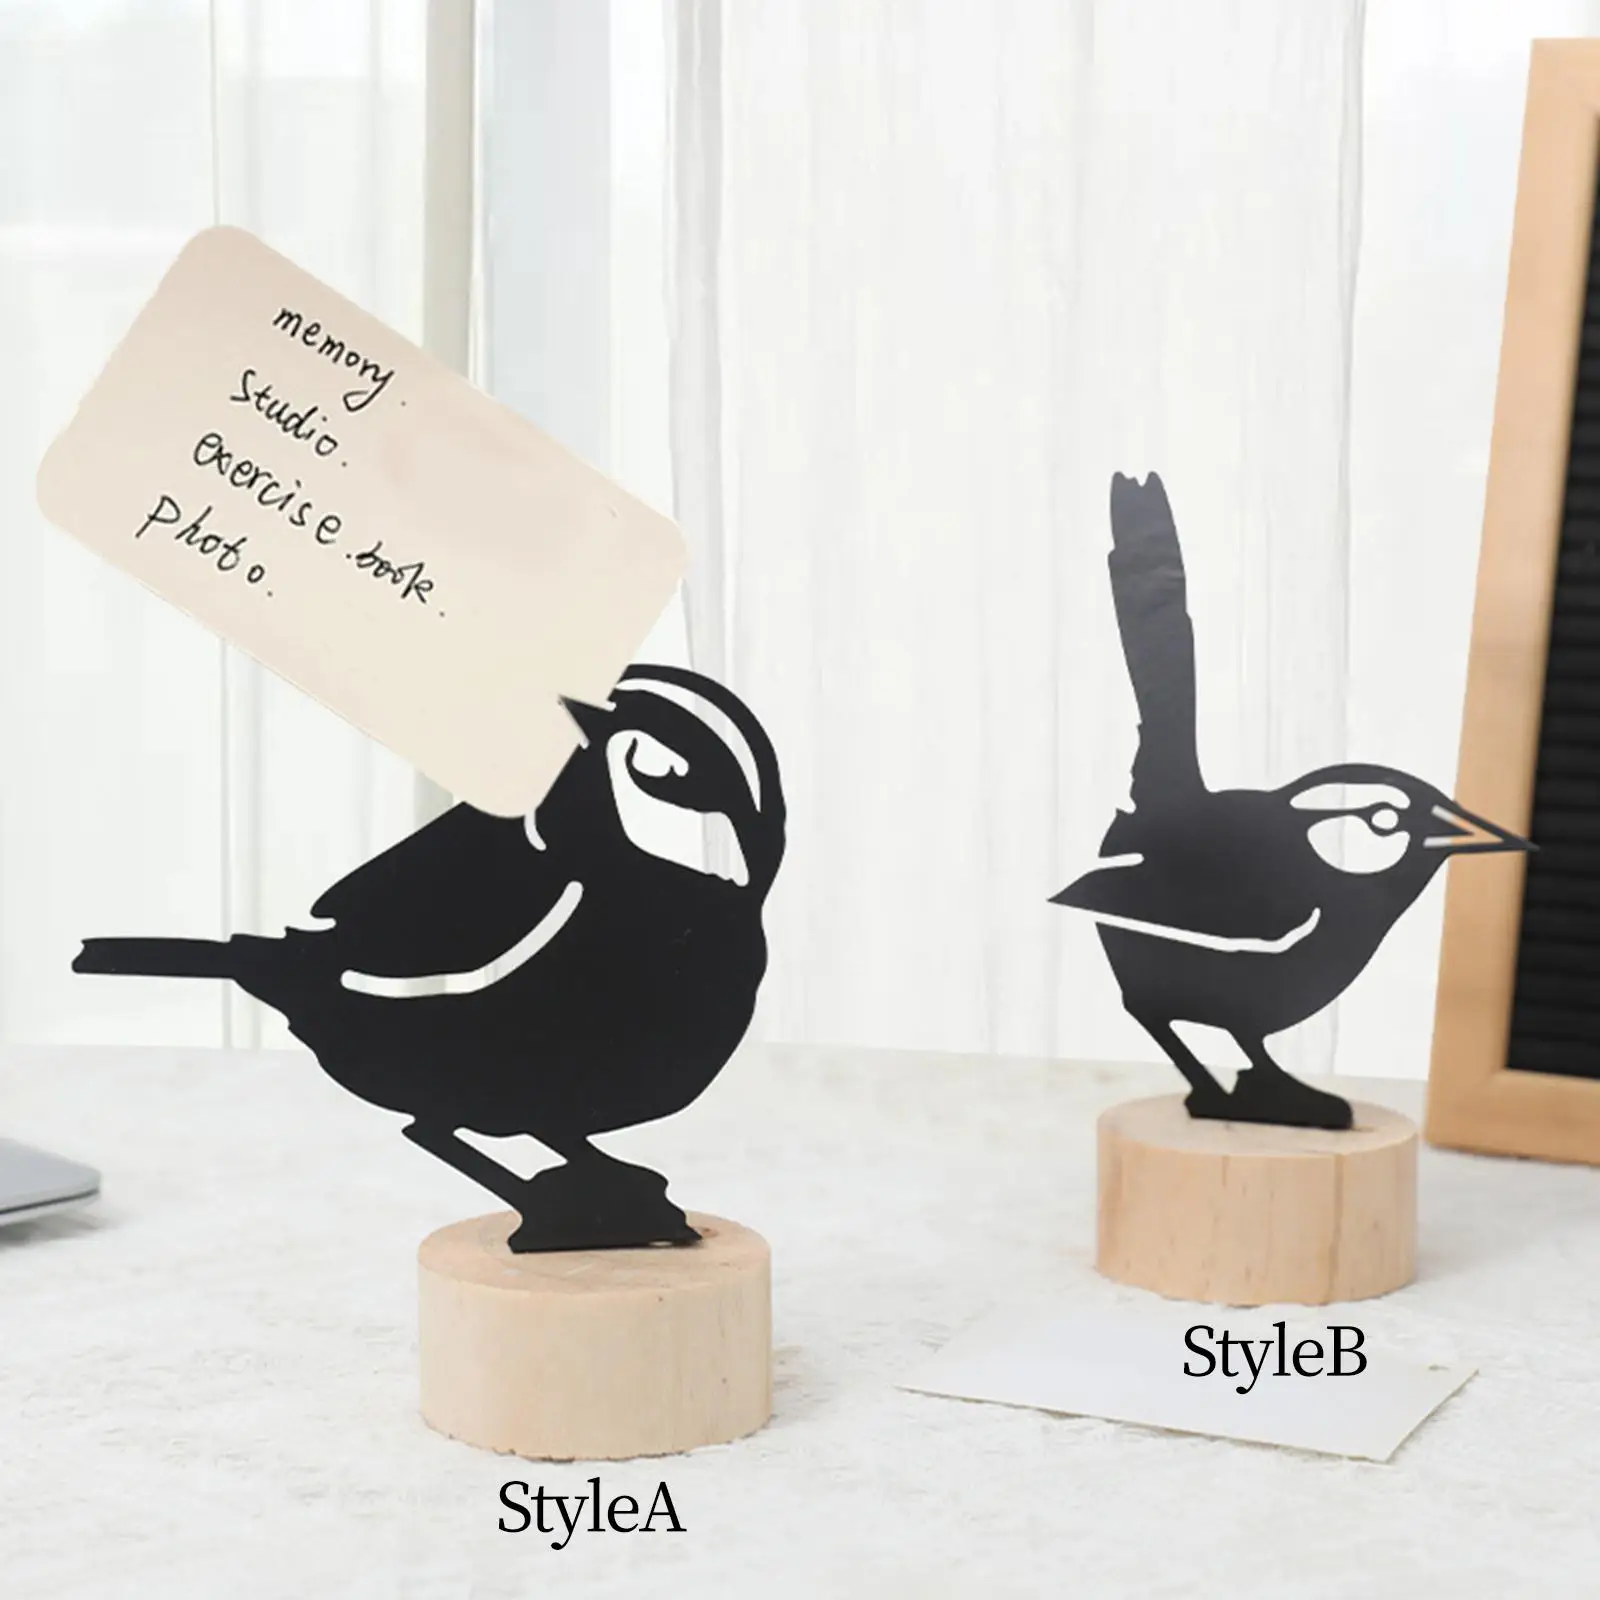 Hollow Bird Silhouettes Table Number Holder Name Card Holder Memo Holder Stand Note Holder Pictures Card Paper Menu Clip